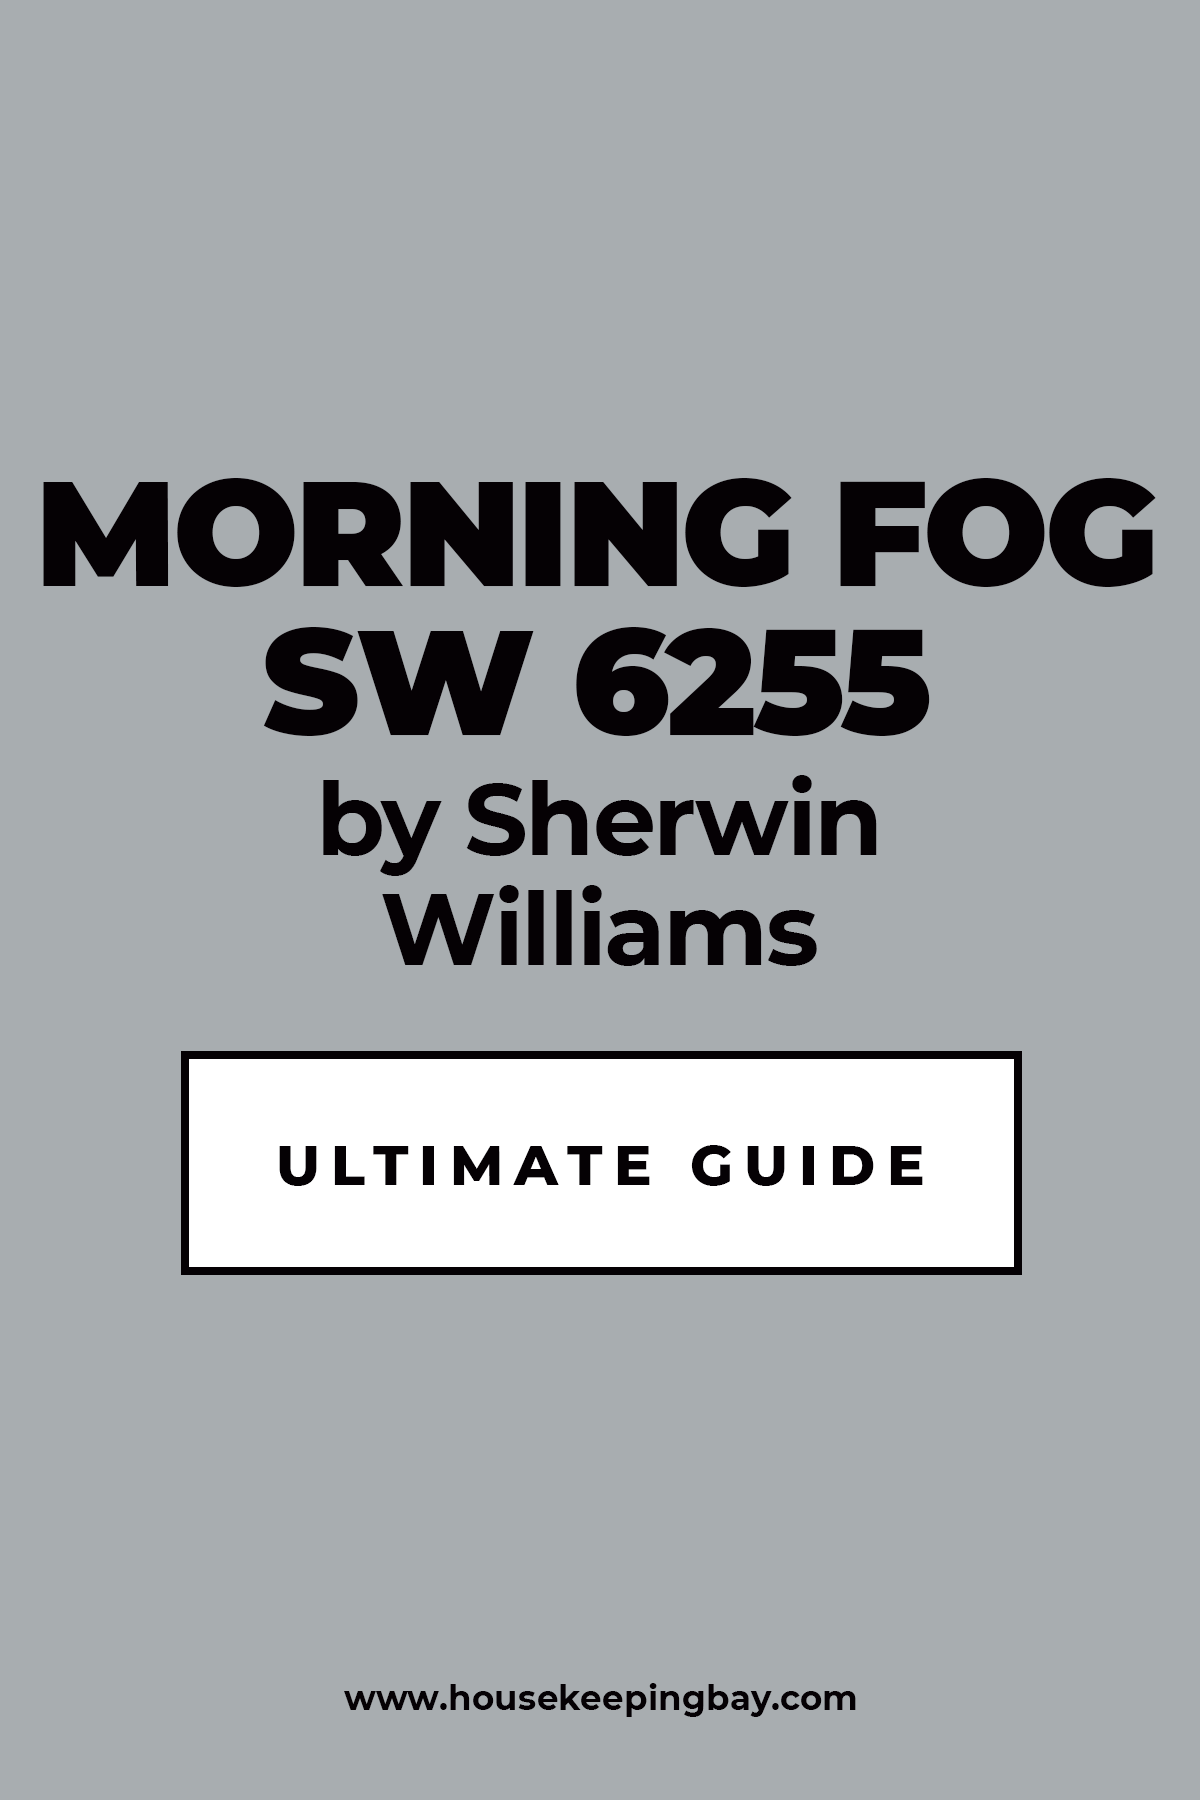 Morning Fog SW 6255 by Sherwin Williams Ultimate Guide